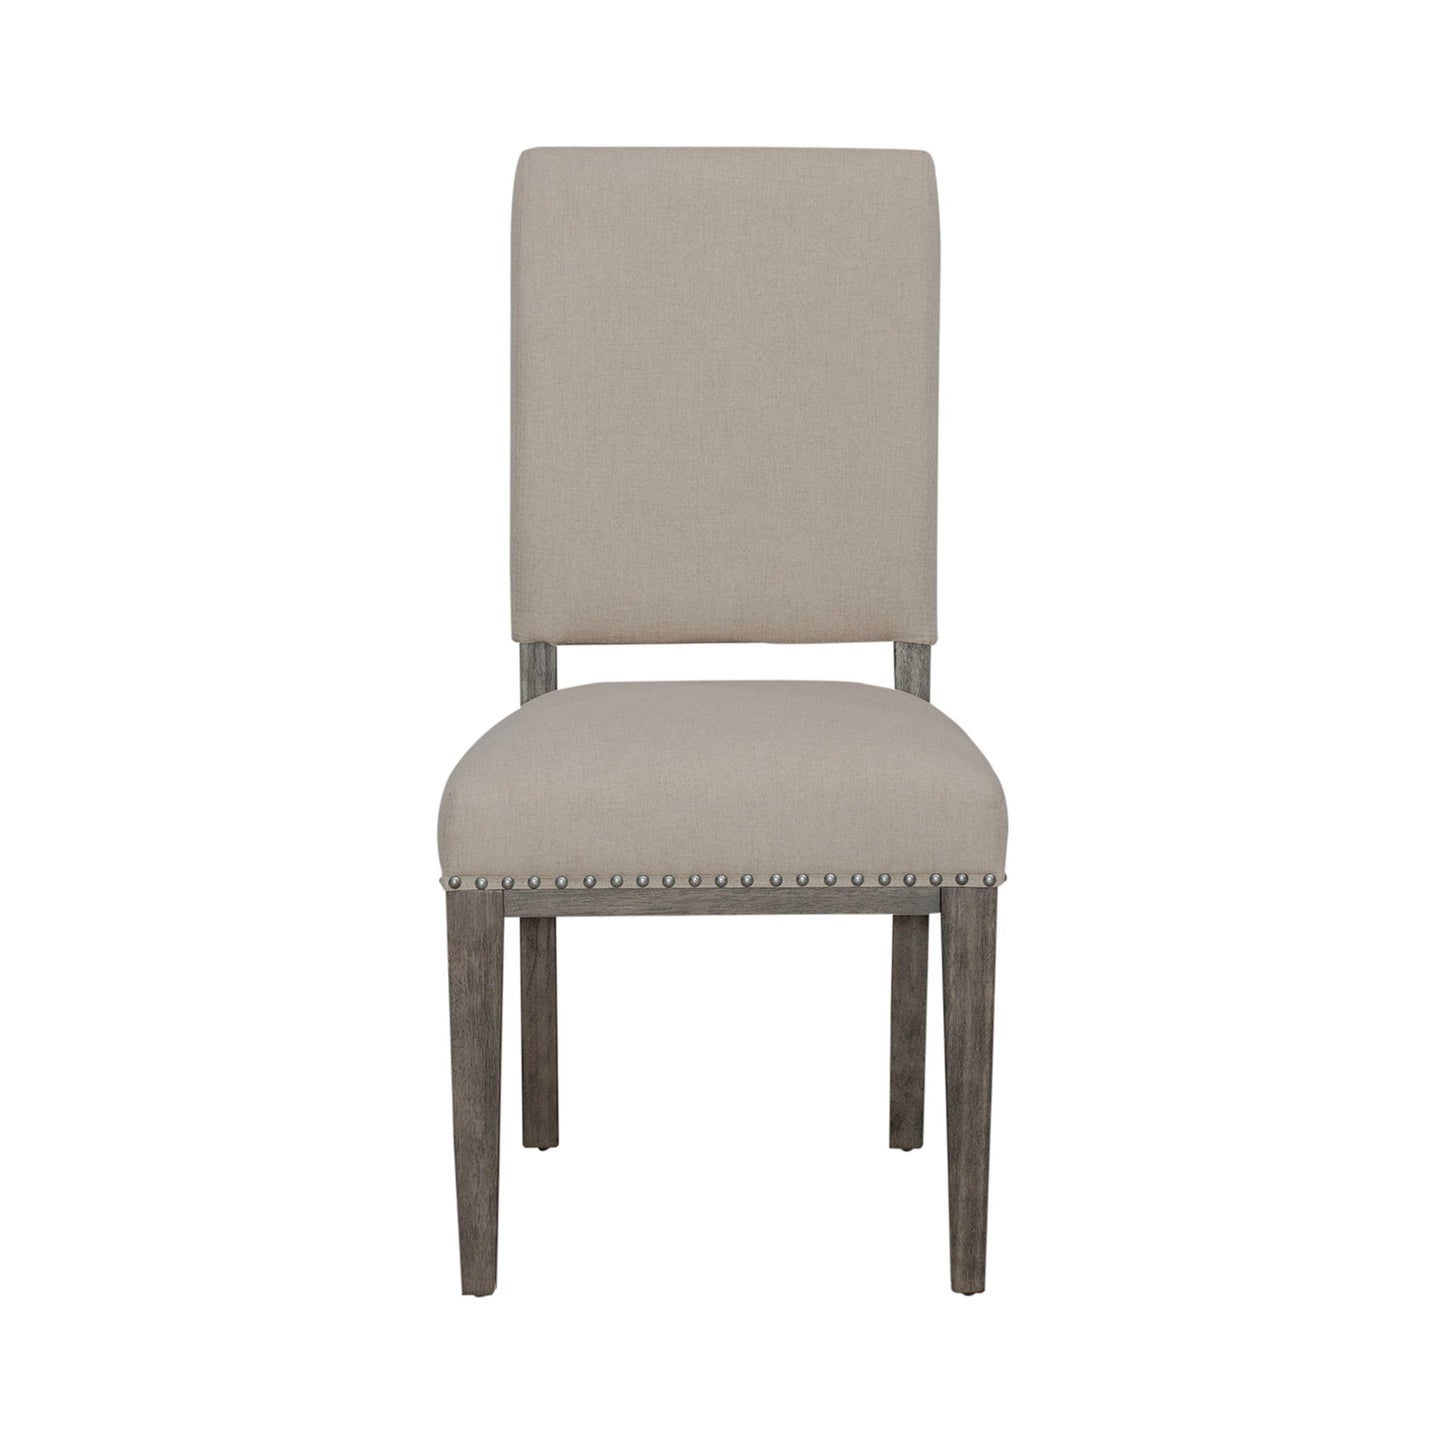 Westfield - Upholstered Side Chair (RTA) - Light Brown